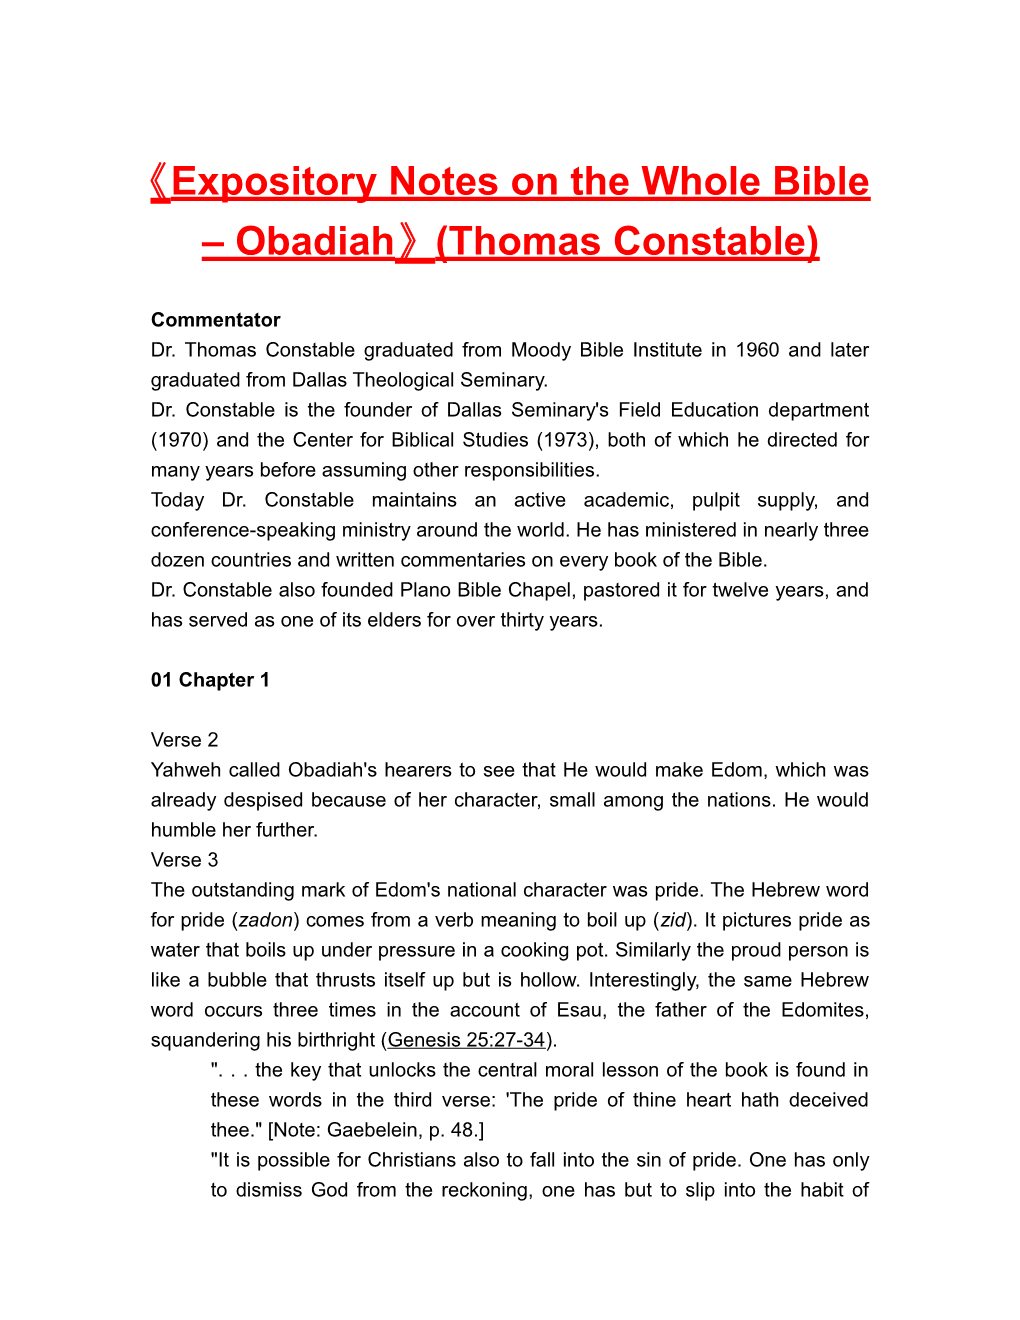 Expositorynotes on the Wholebible Obadiah (Thomas Constable)